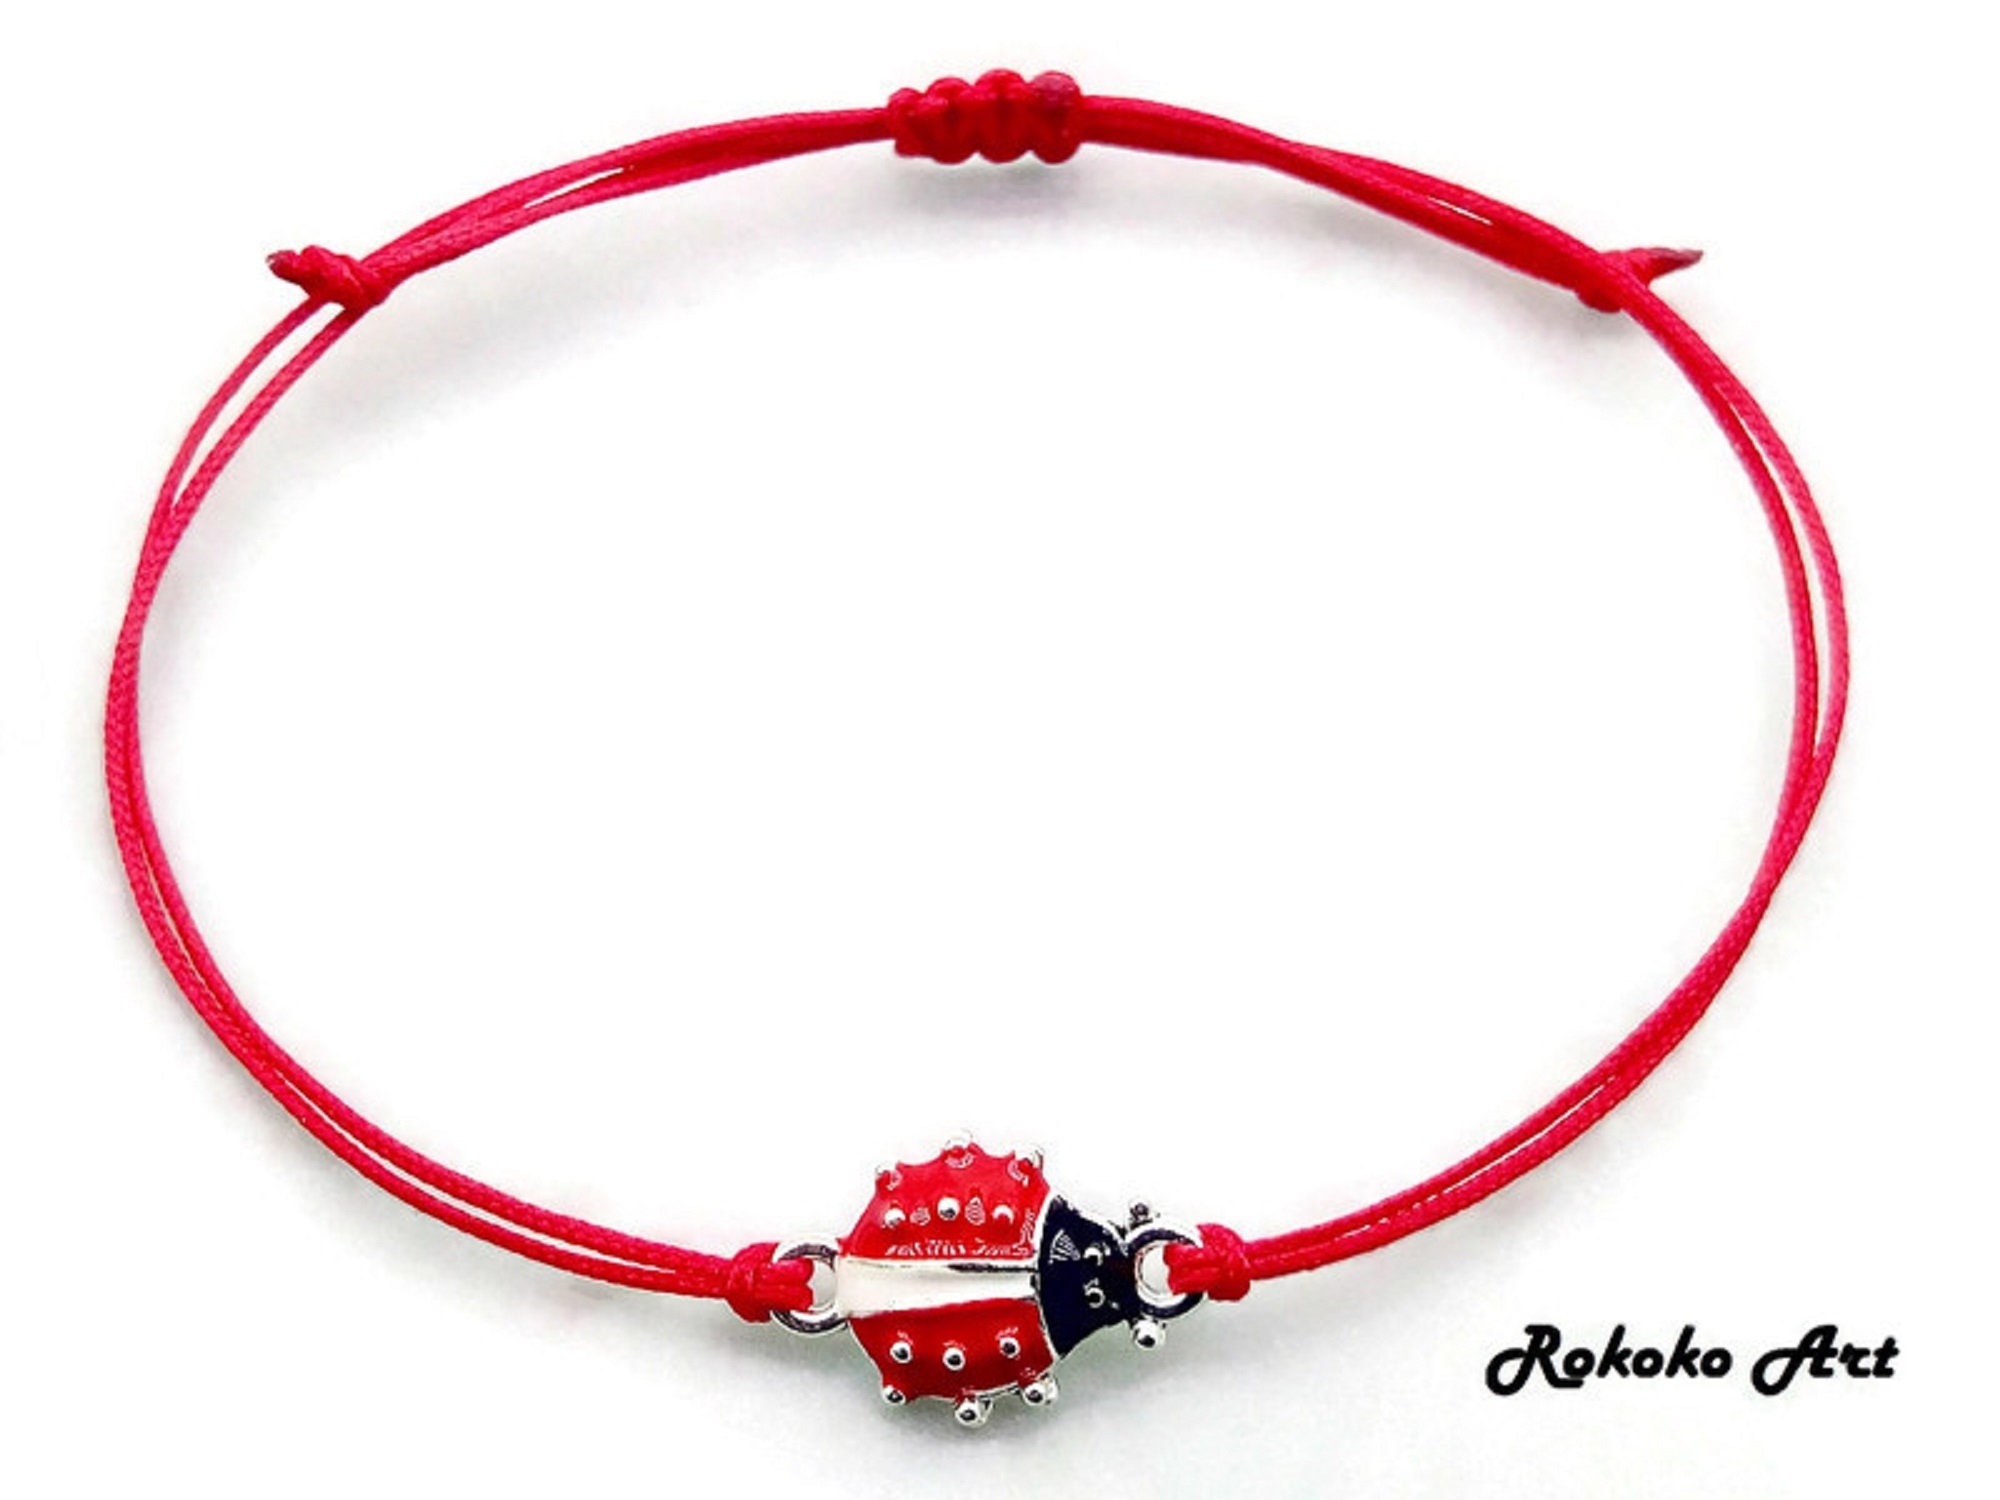 Ladybug Charm Bracelet with Ladybug Charms in Red and Black